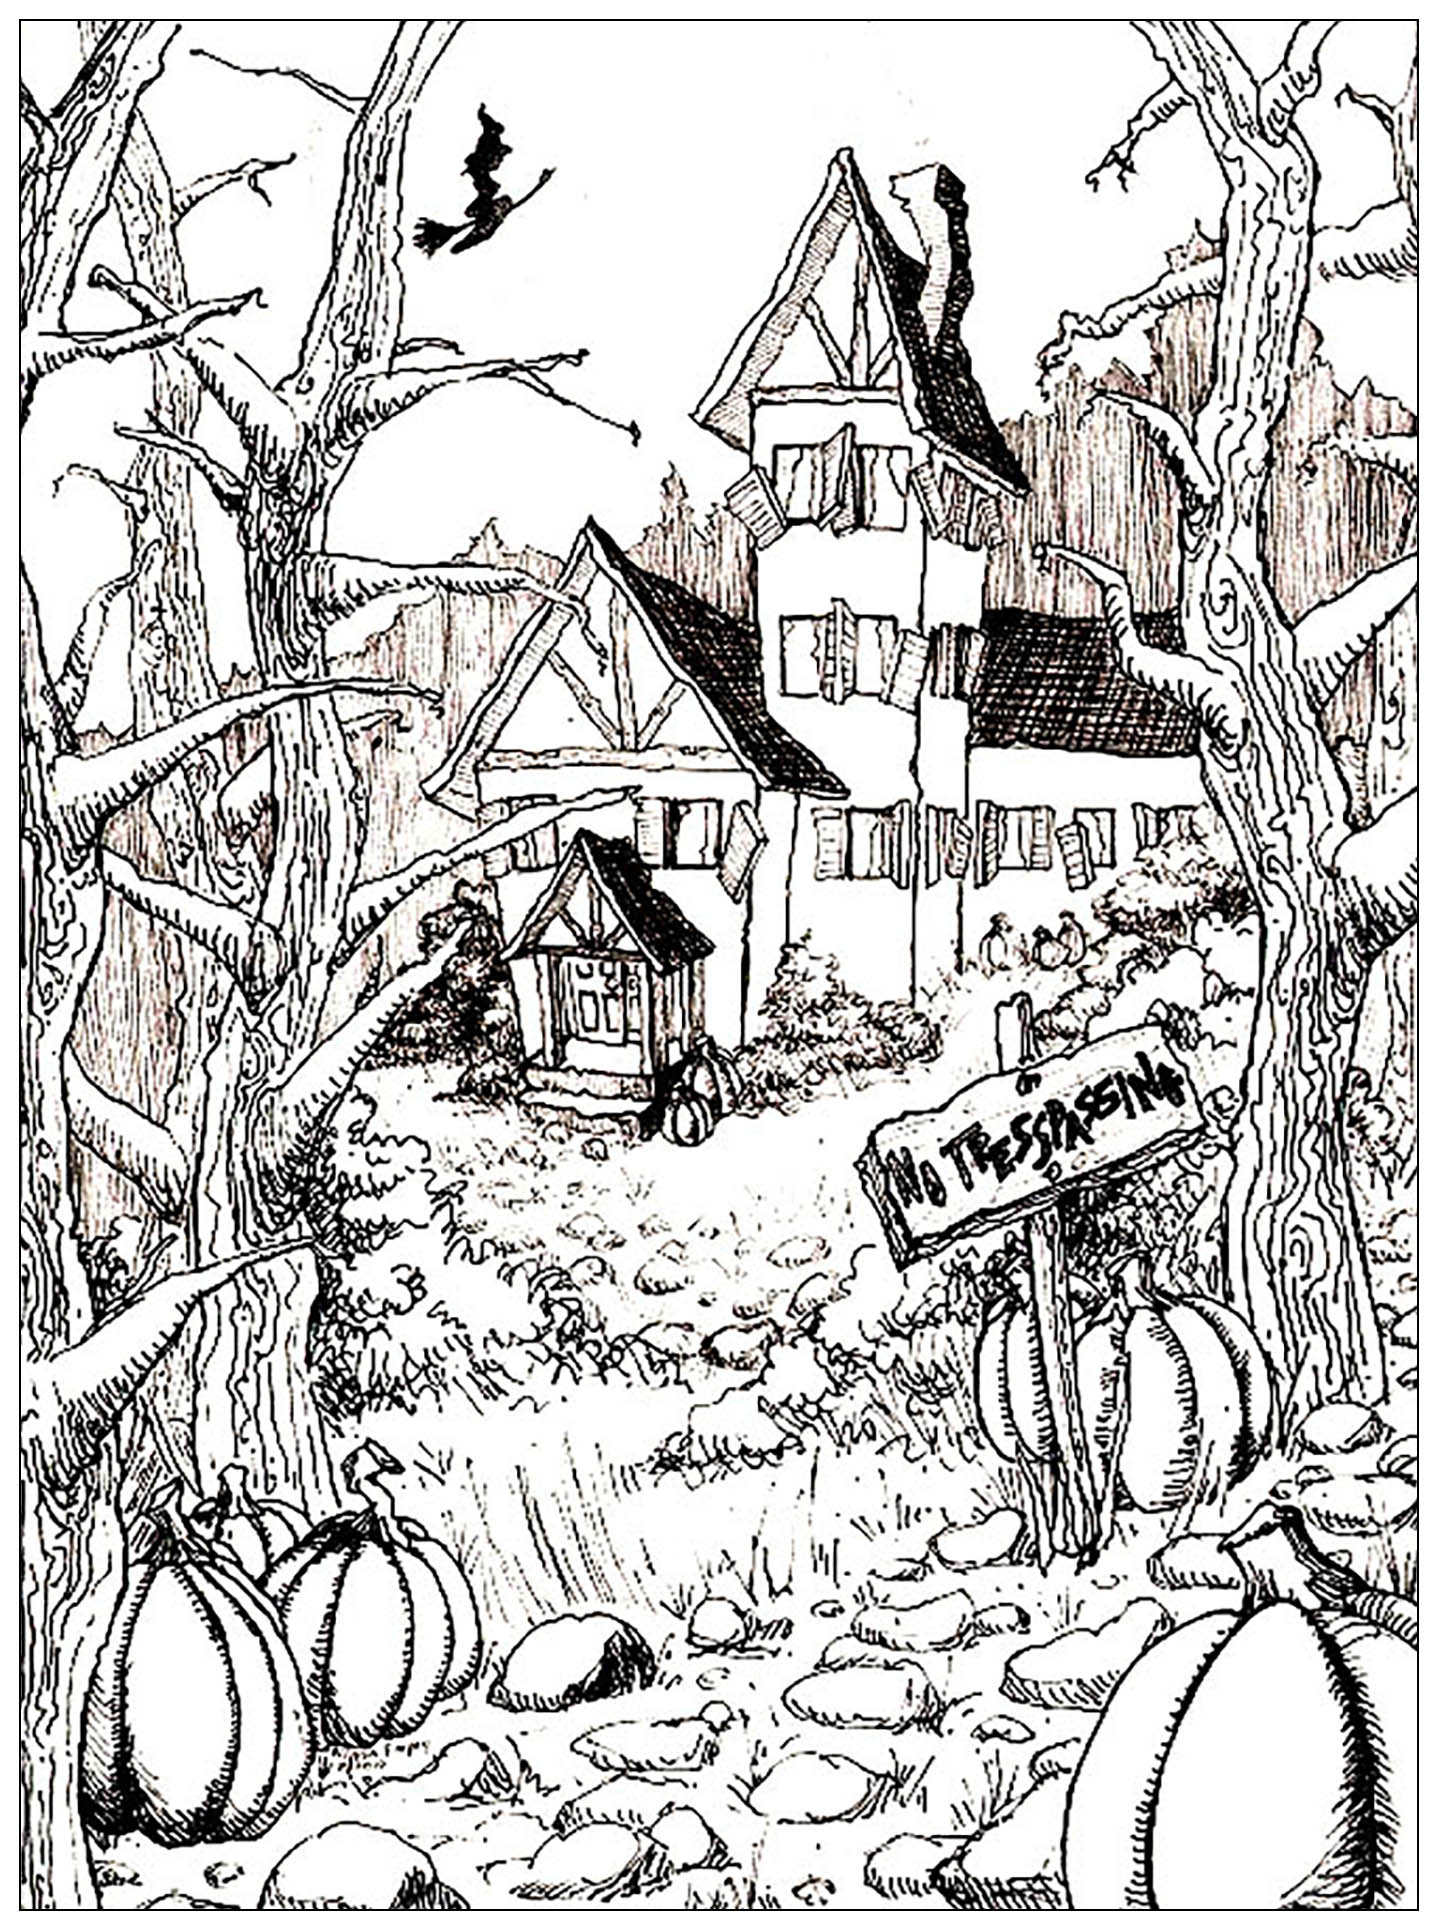 Halloween Free To Color For Children - Halloween Kids Coloring Pages à Dessin Pour Halloween 